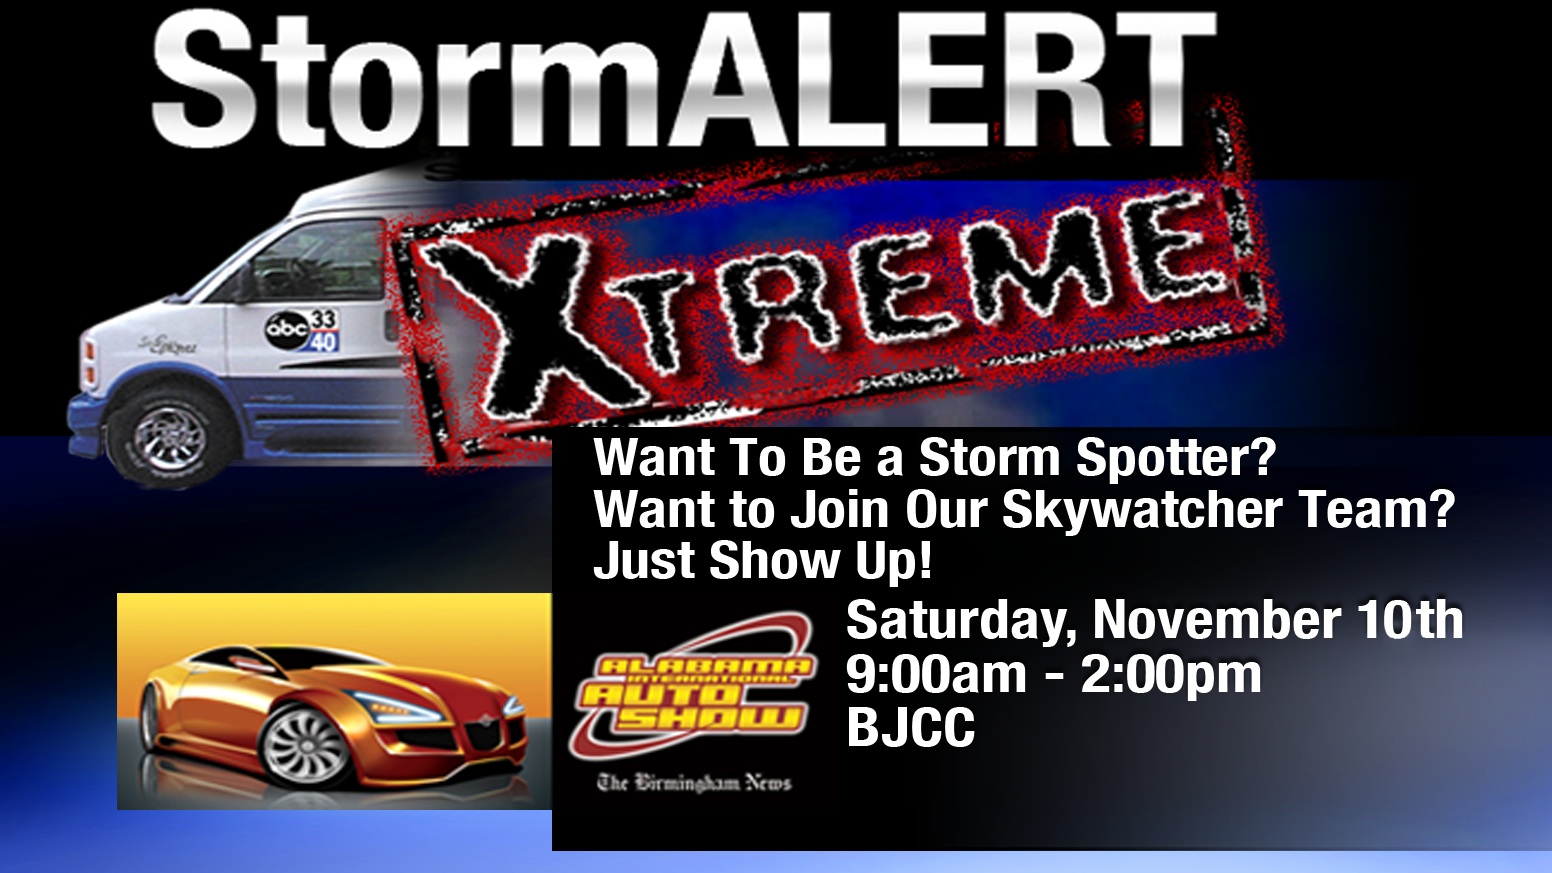 Spotter Training Is Tomorrow!